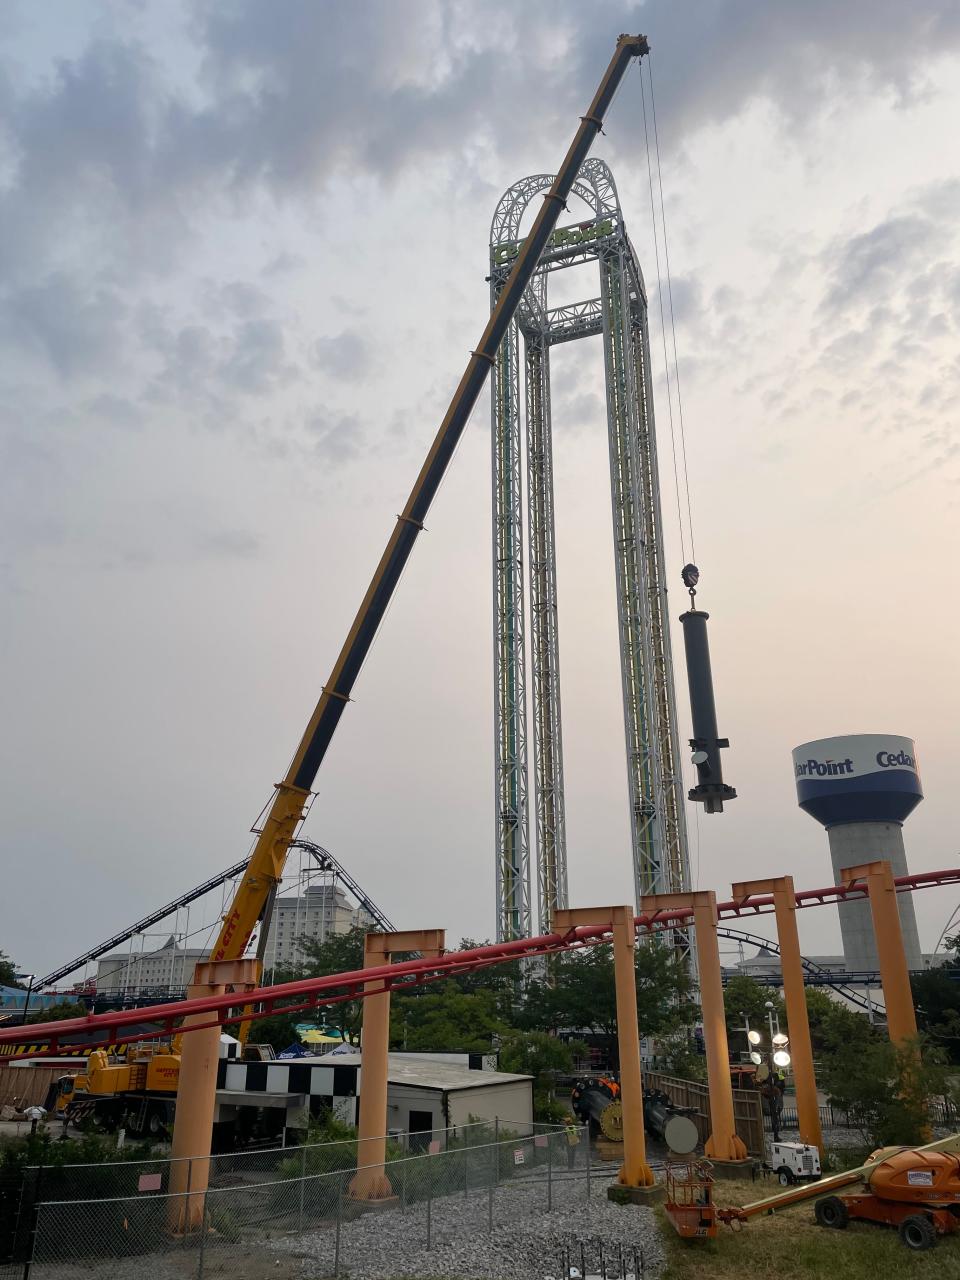 A large crane lifts the first piece of the new second 420-foot-tall tower that will be part of Cedar Point's Top Thrill 2 coaster.